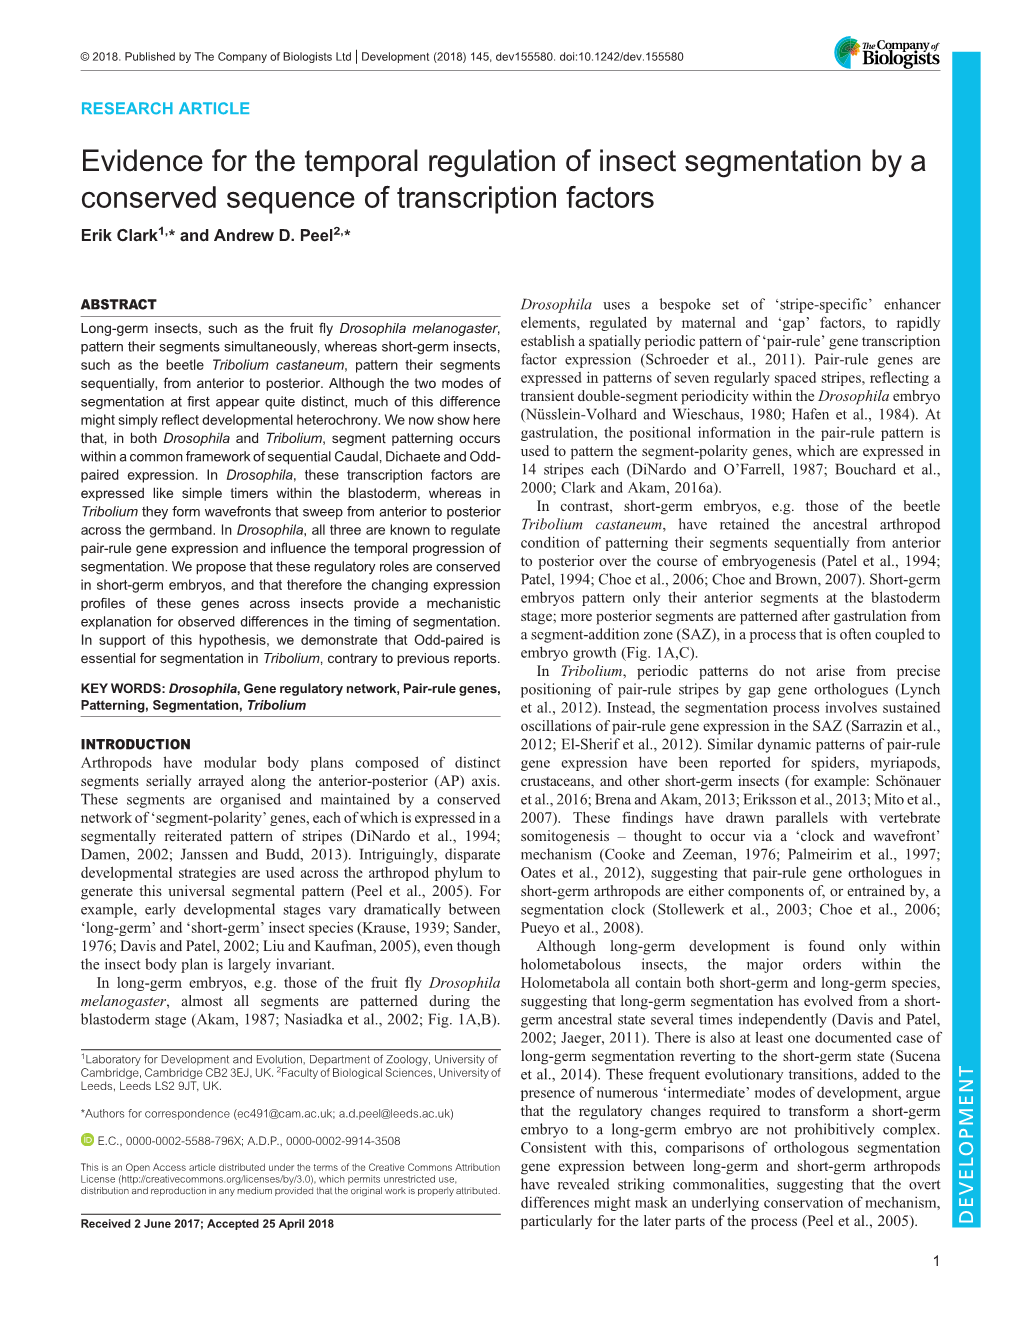 Evidence for the Temporal Regulation of Insect Segmentation by a Conserved Sequence of Transcription Factors Erik Clark1,* and Andrew D